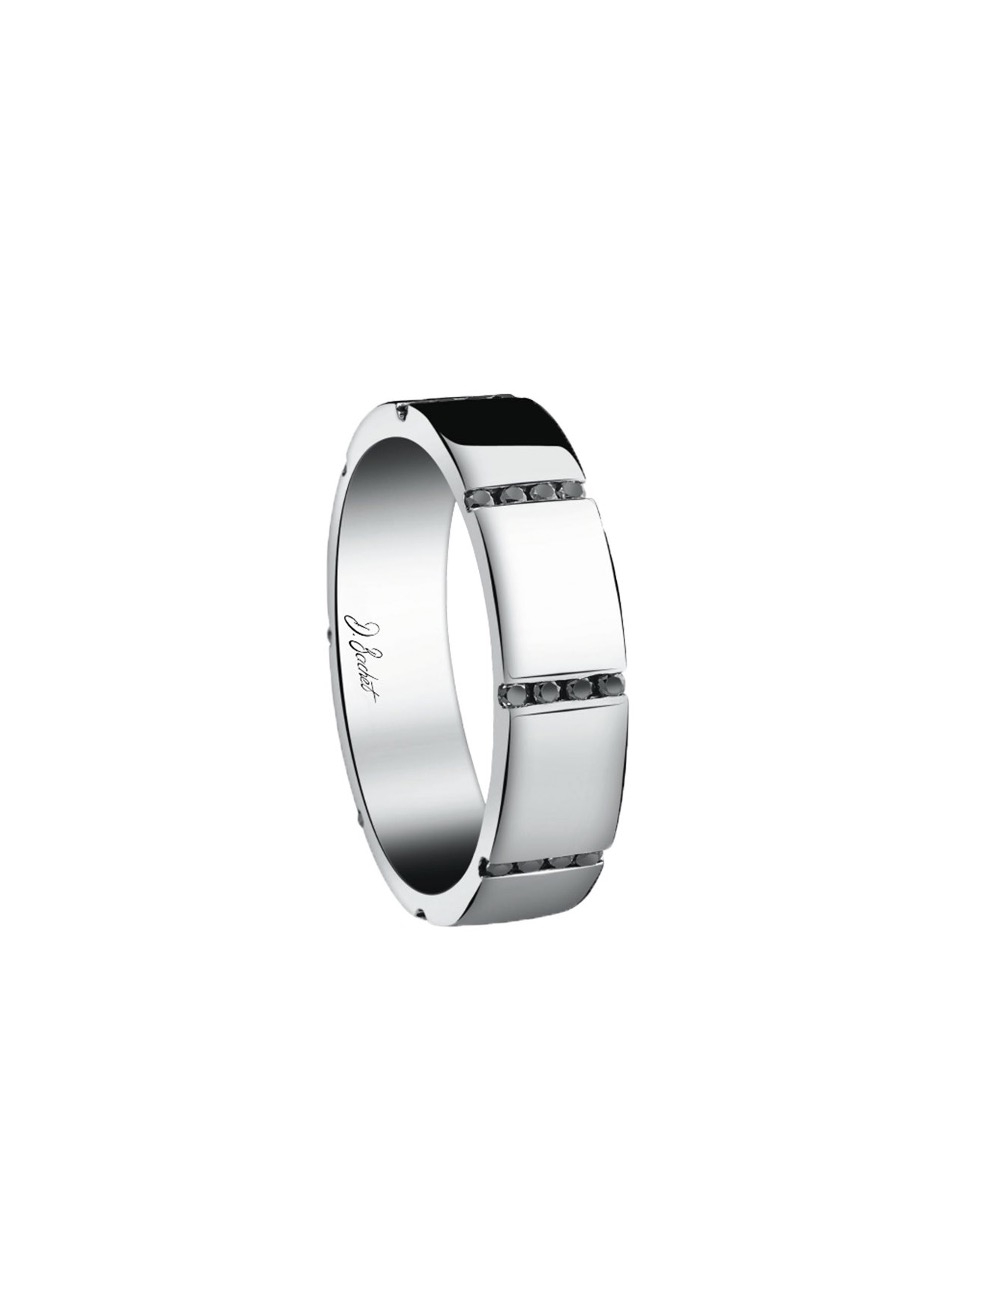 For men looking for a more original and modern style, a wedding band in platinum and black diamonds.